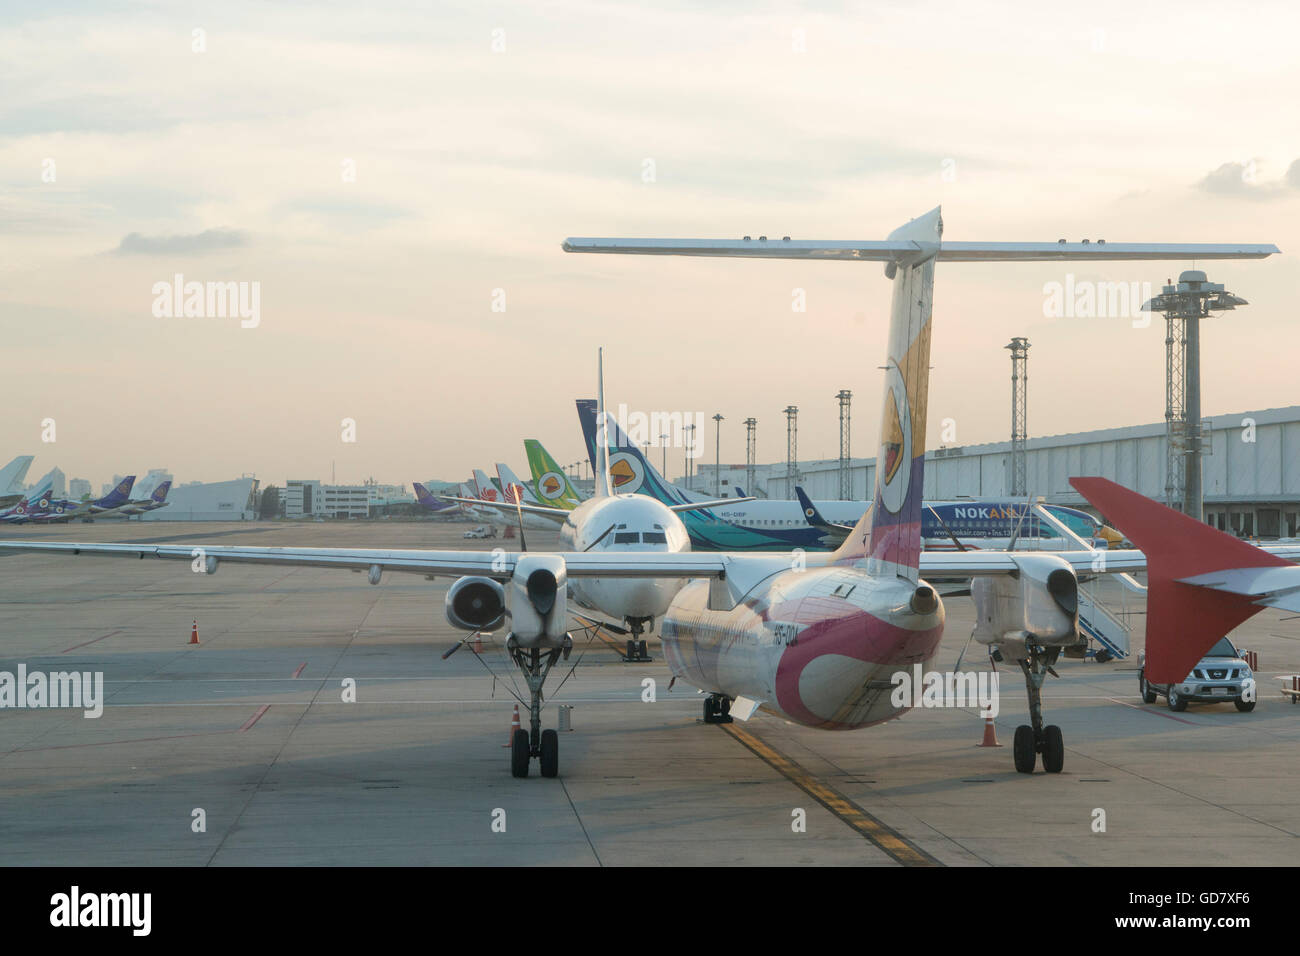 airplanes of Nok air at the Don Muang Airport in Bangkok in Thailand in southeastasia. Stock Photo